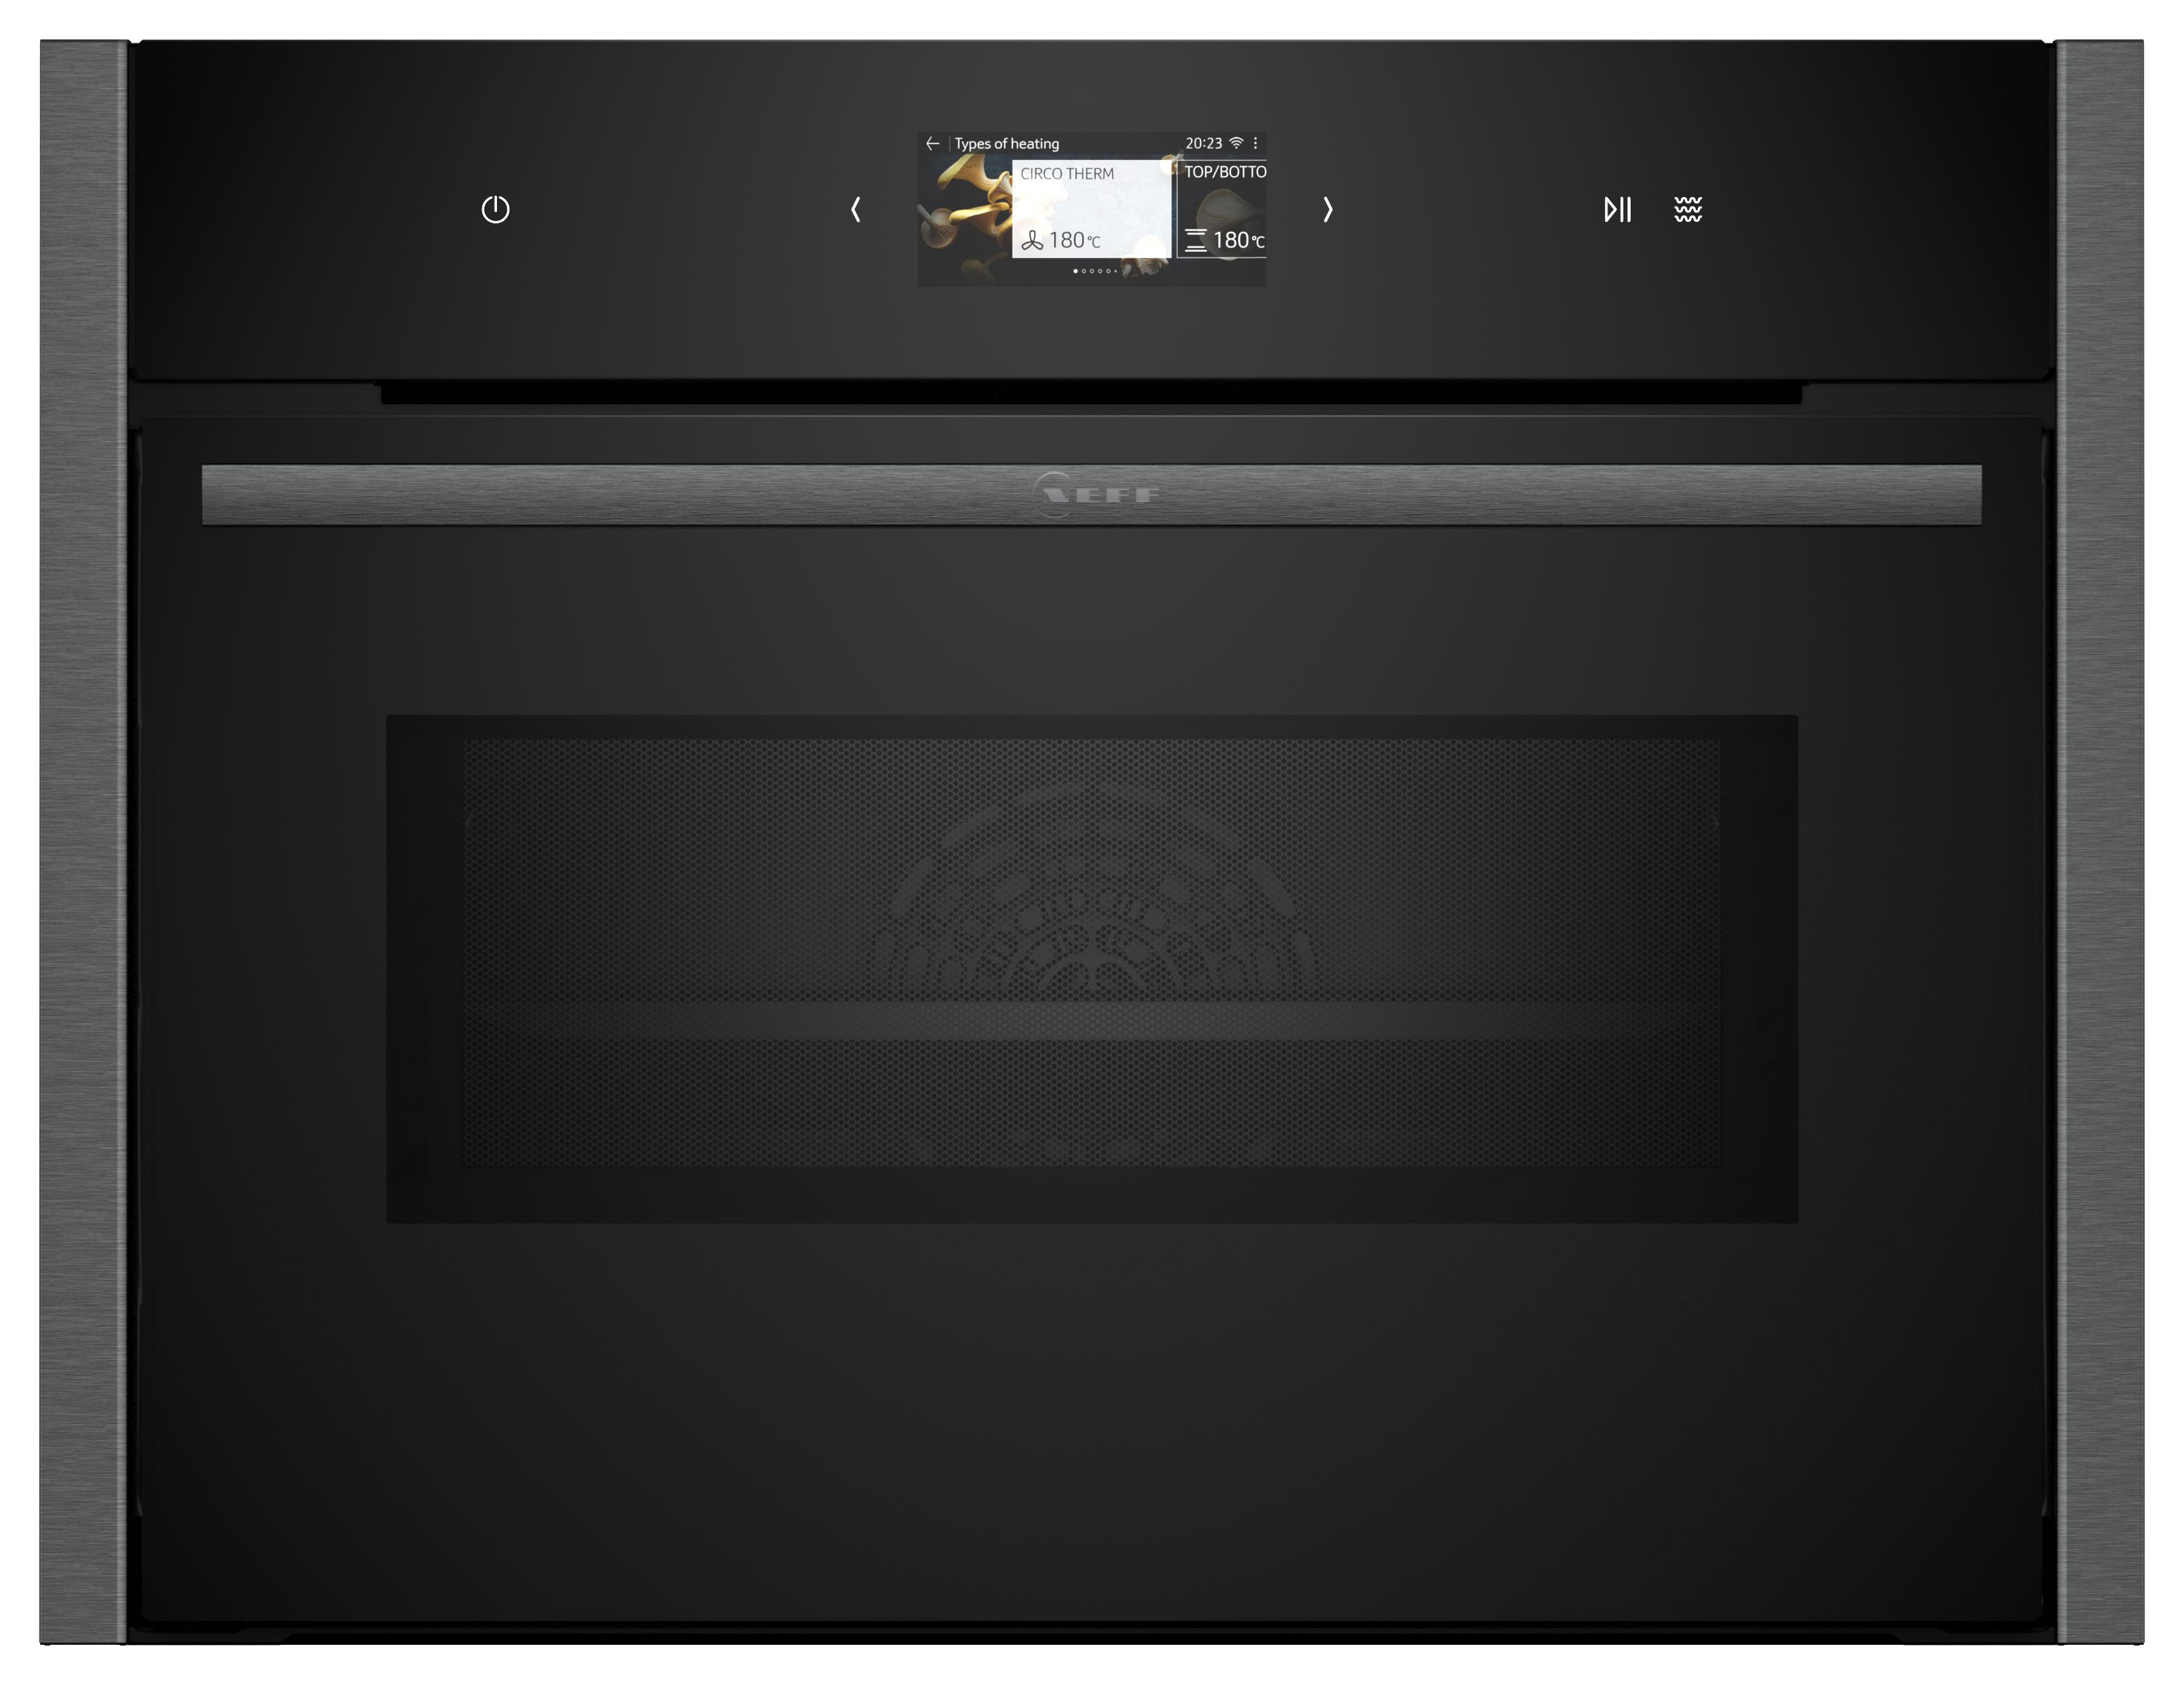 NEFF C24MS31G0B N90 Compact Oven with Microwave - Graphite Grey